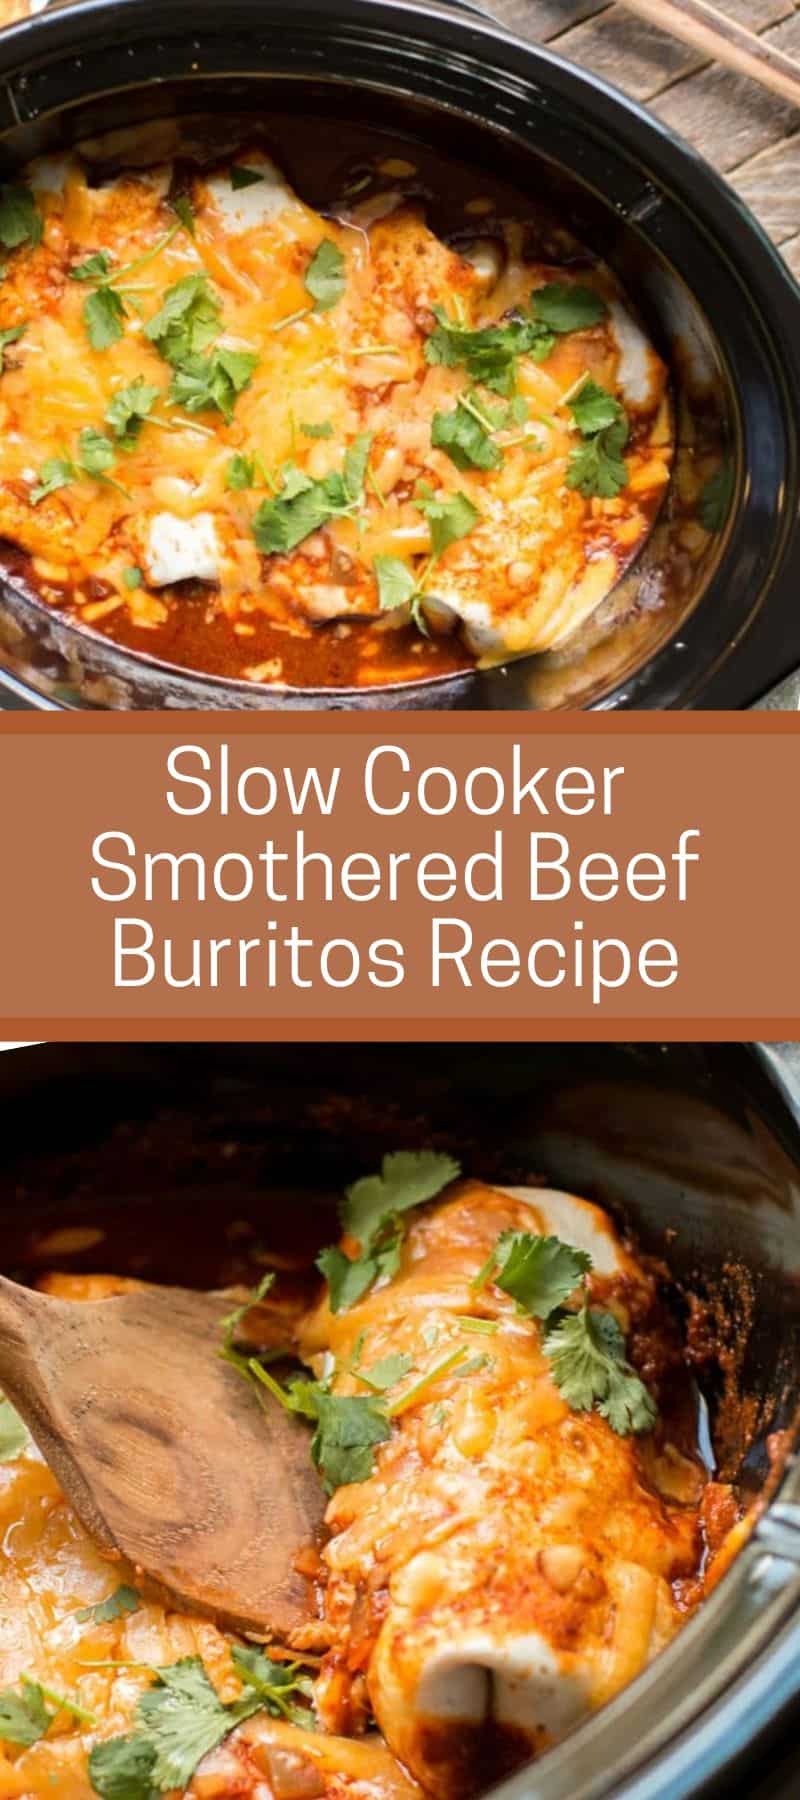 Slow Cooker Smothered Beef Burritos Recipe